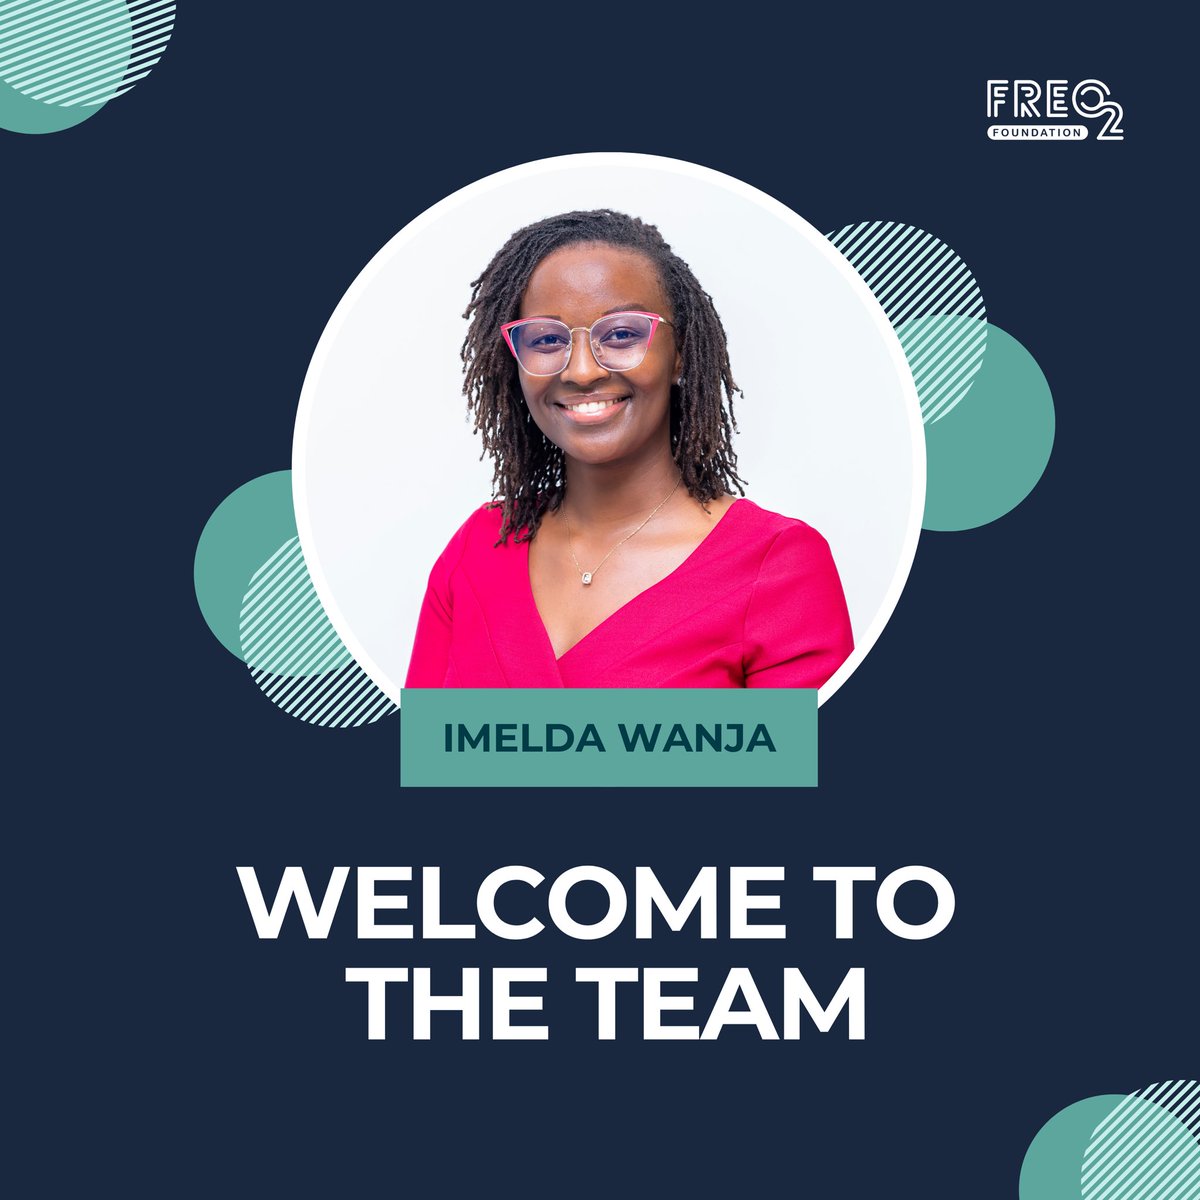 Thrilled to welcome Imelda Wanja to FREO2 team as our new East Africa Lead! 🌍 

Imelda brings expertise across #fundraising, strategic partnerships, sustainable impact, grant coordination & project management in both the #forprofit & #nonprofit sectors. 

Welcome, Imelda! 🎊